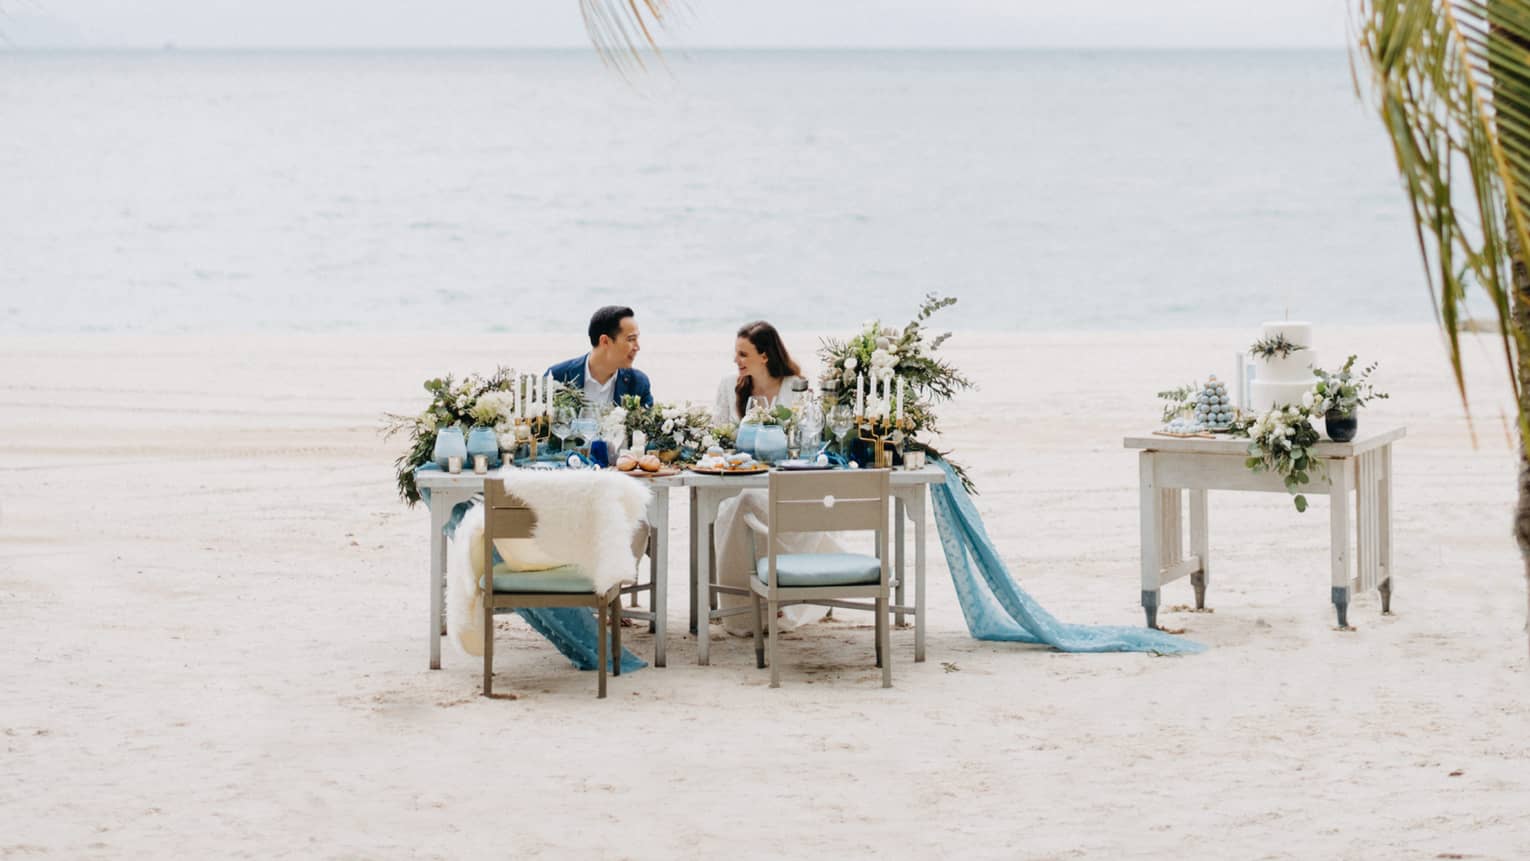 Smiling couple at private dining on white sand beach past palm leaves